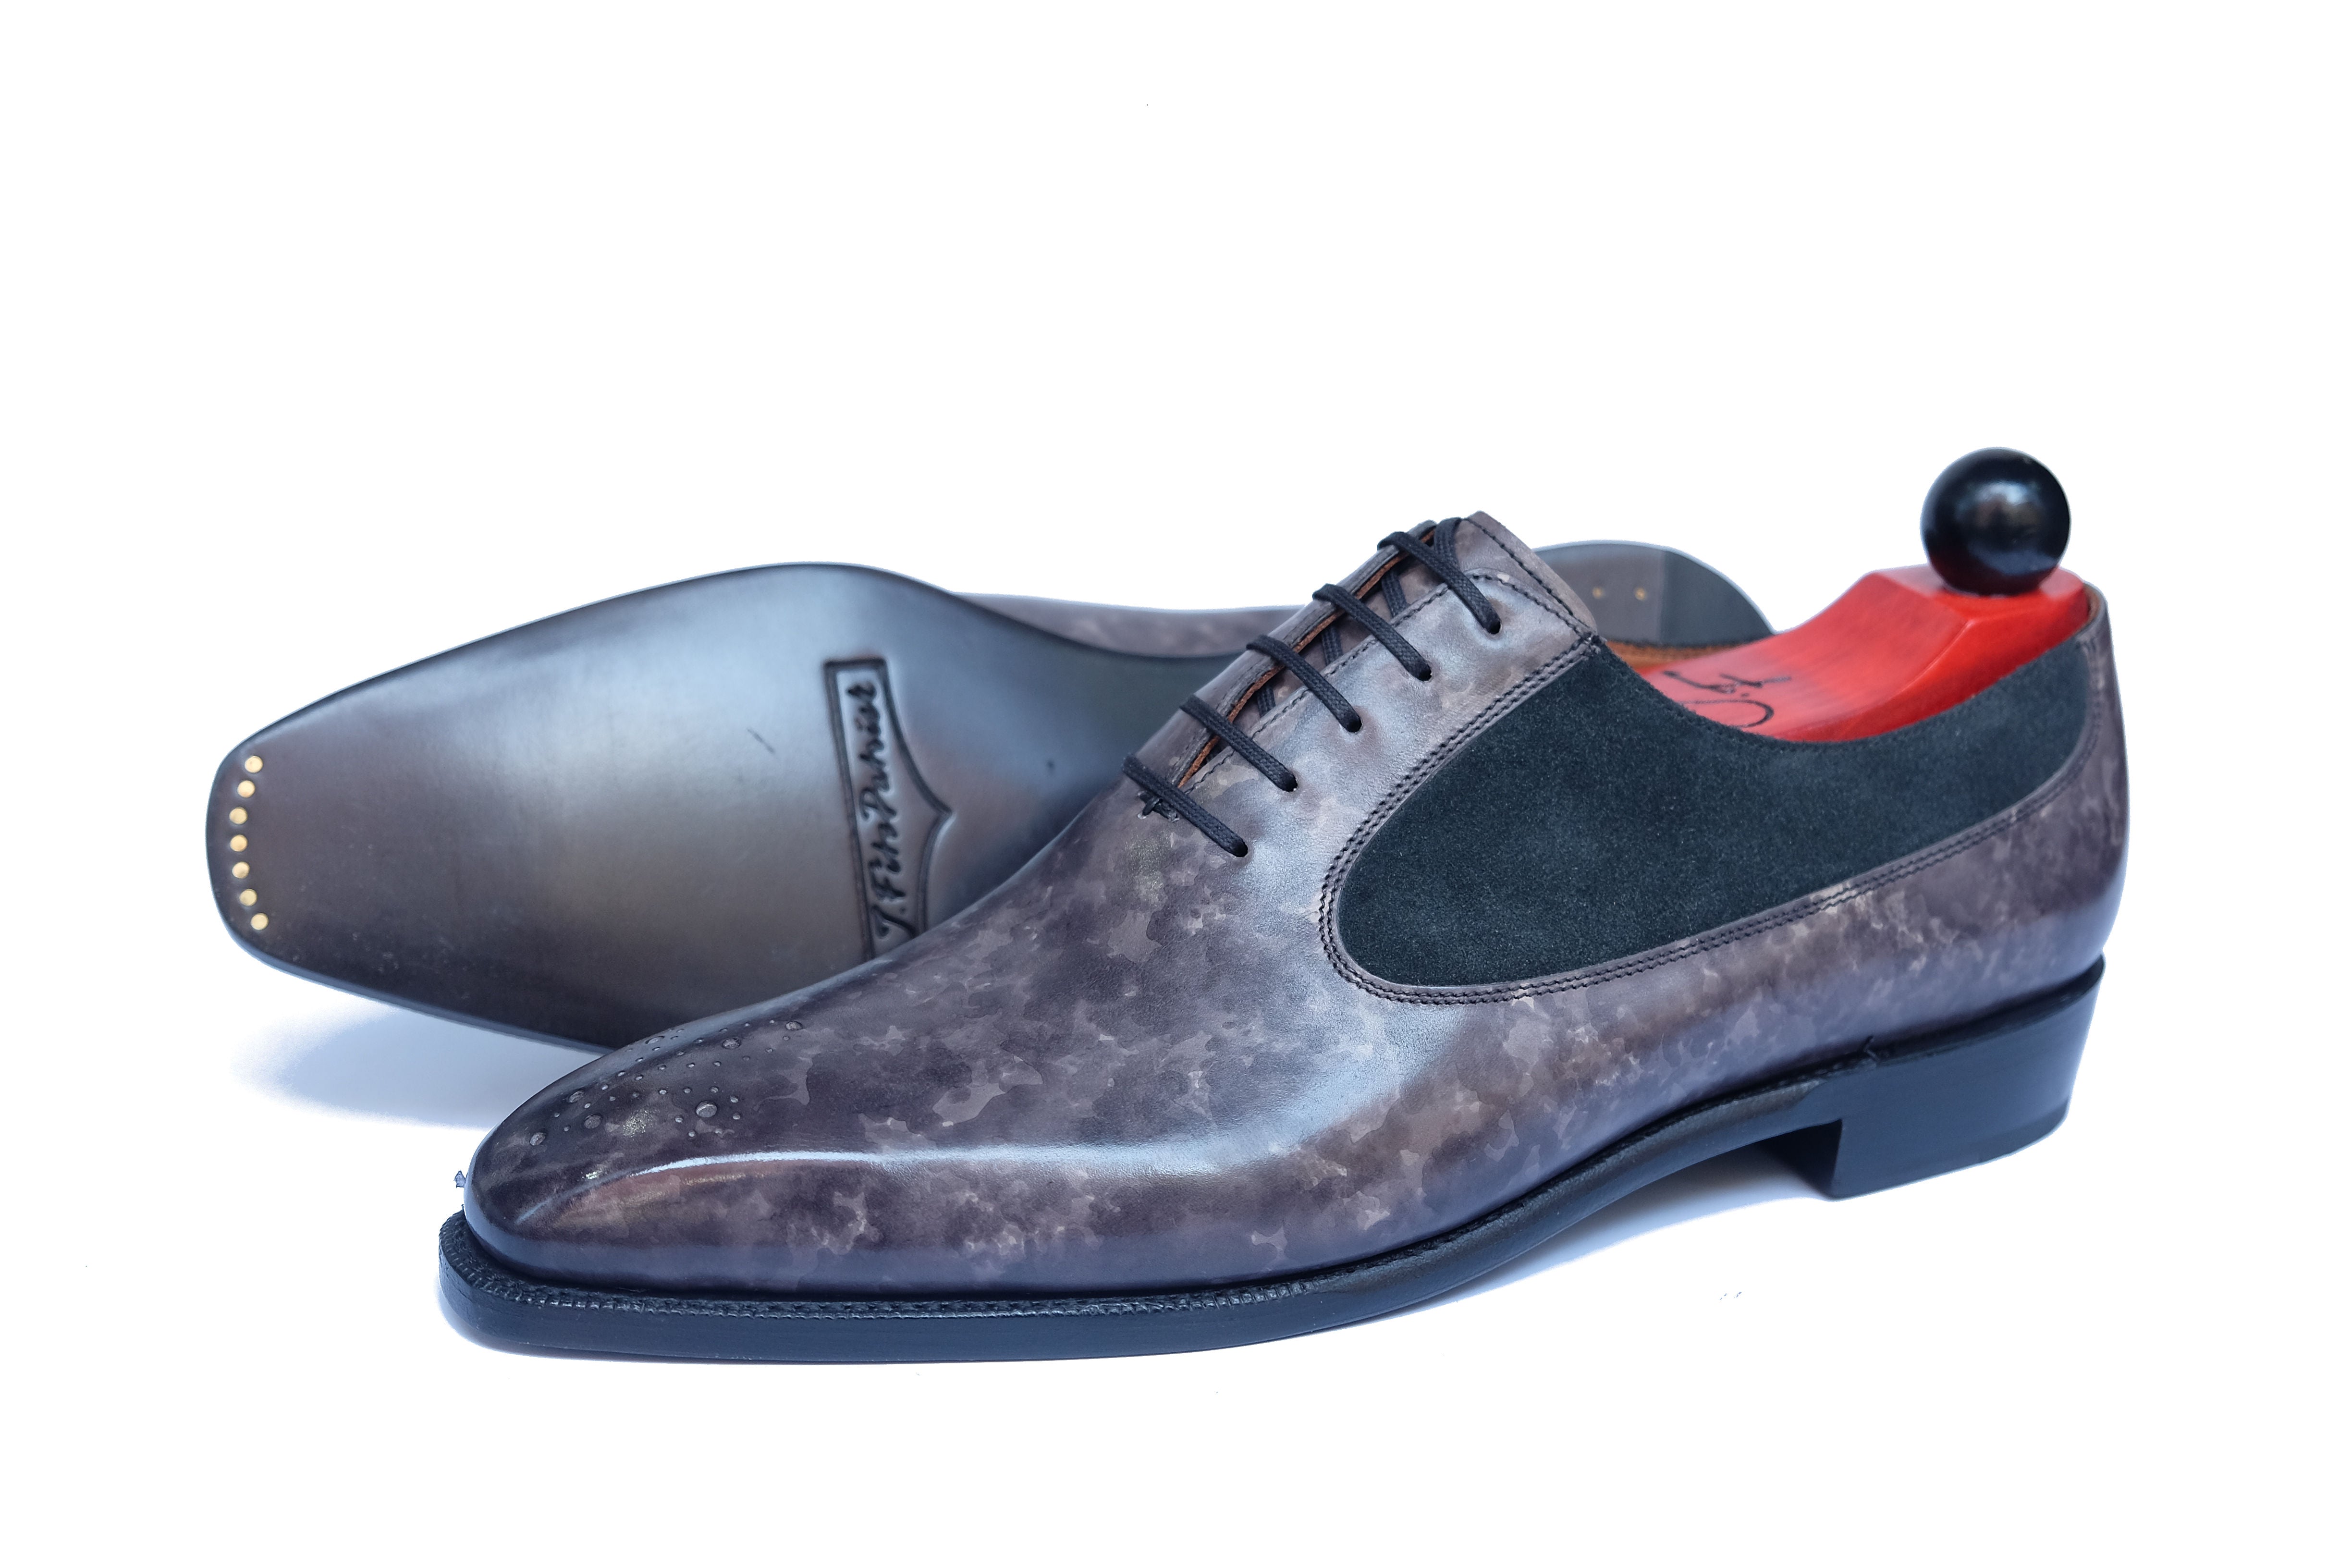 Tacoma - MTO - Grey Marble Patina / Black Suede - MGF Last - Single Leather Sole